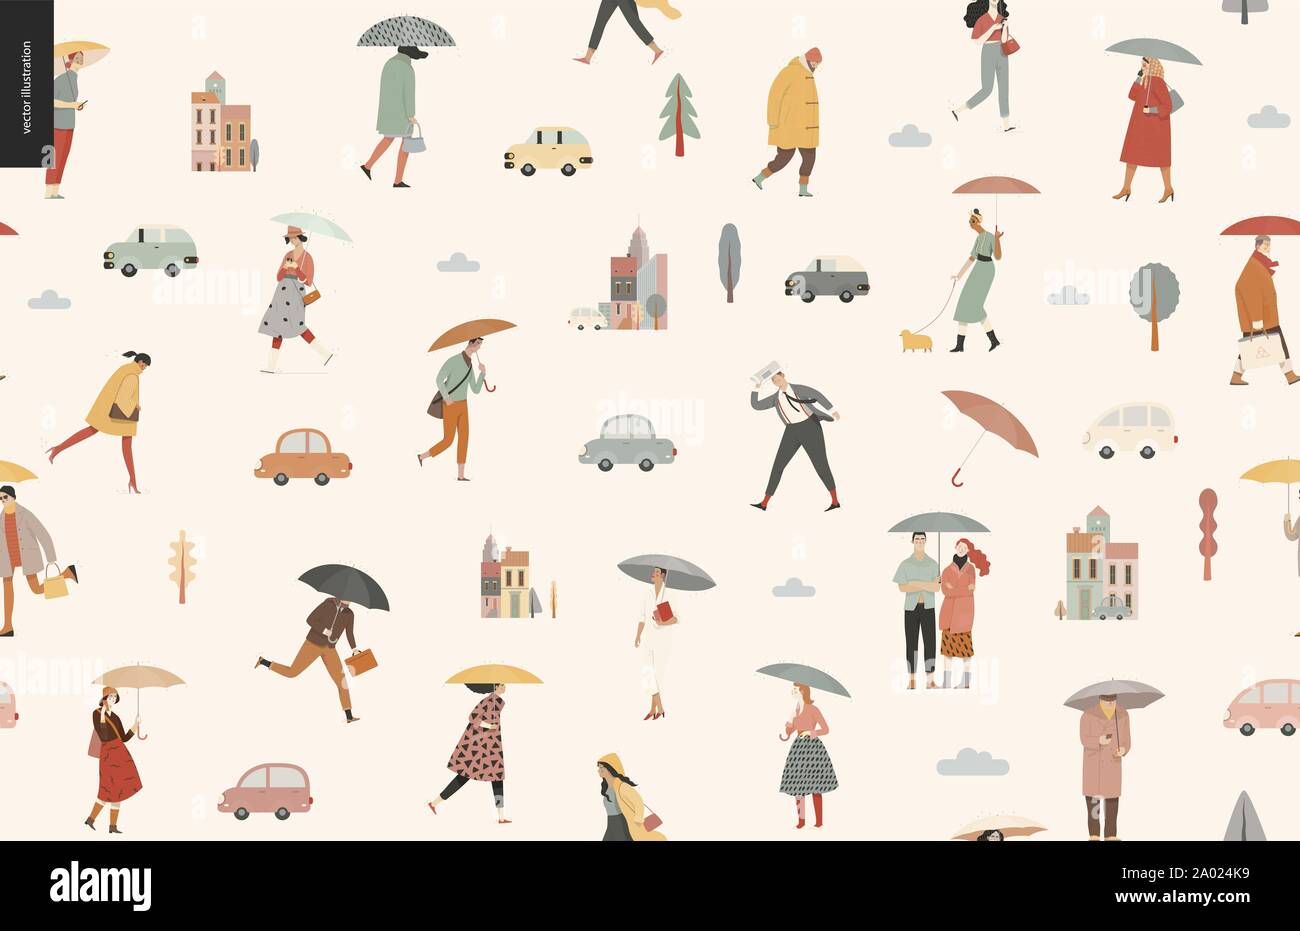 Rain -walking people seamless pattern -modern flat vector concept illustration of people with umbrella, walking or standing in the rain in the street, Stock Vector